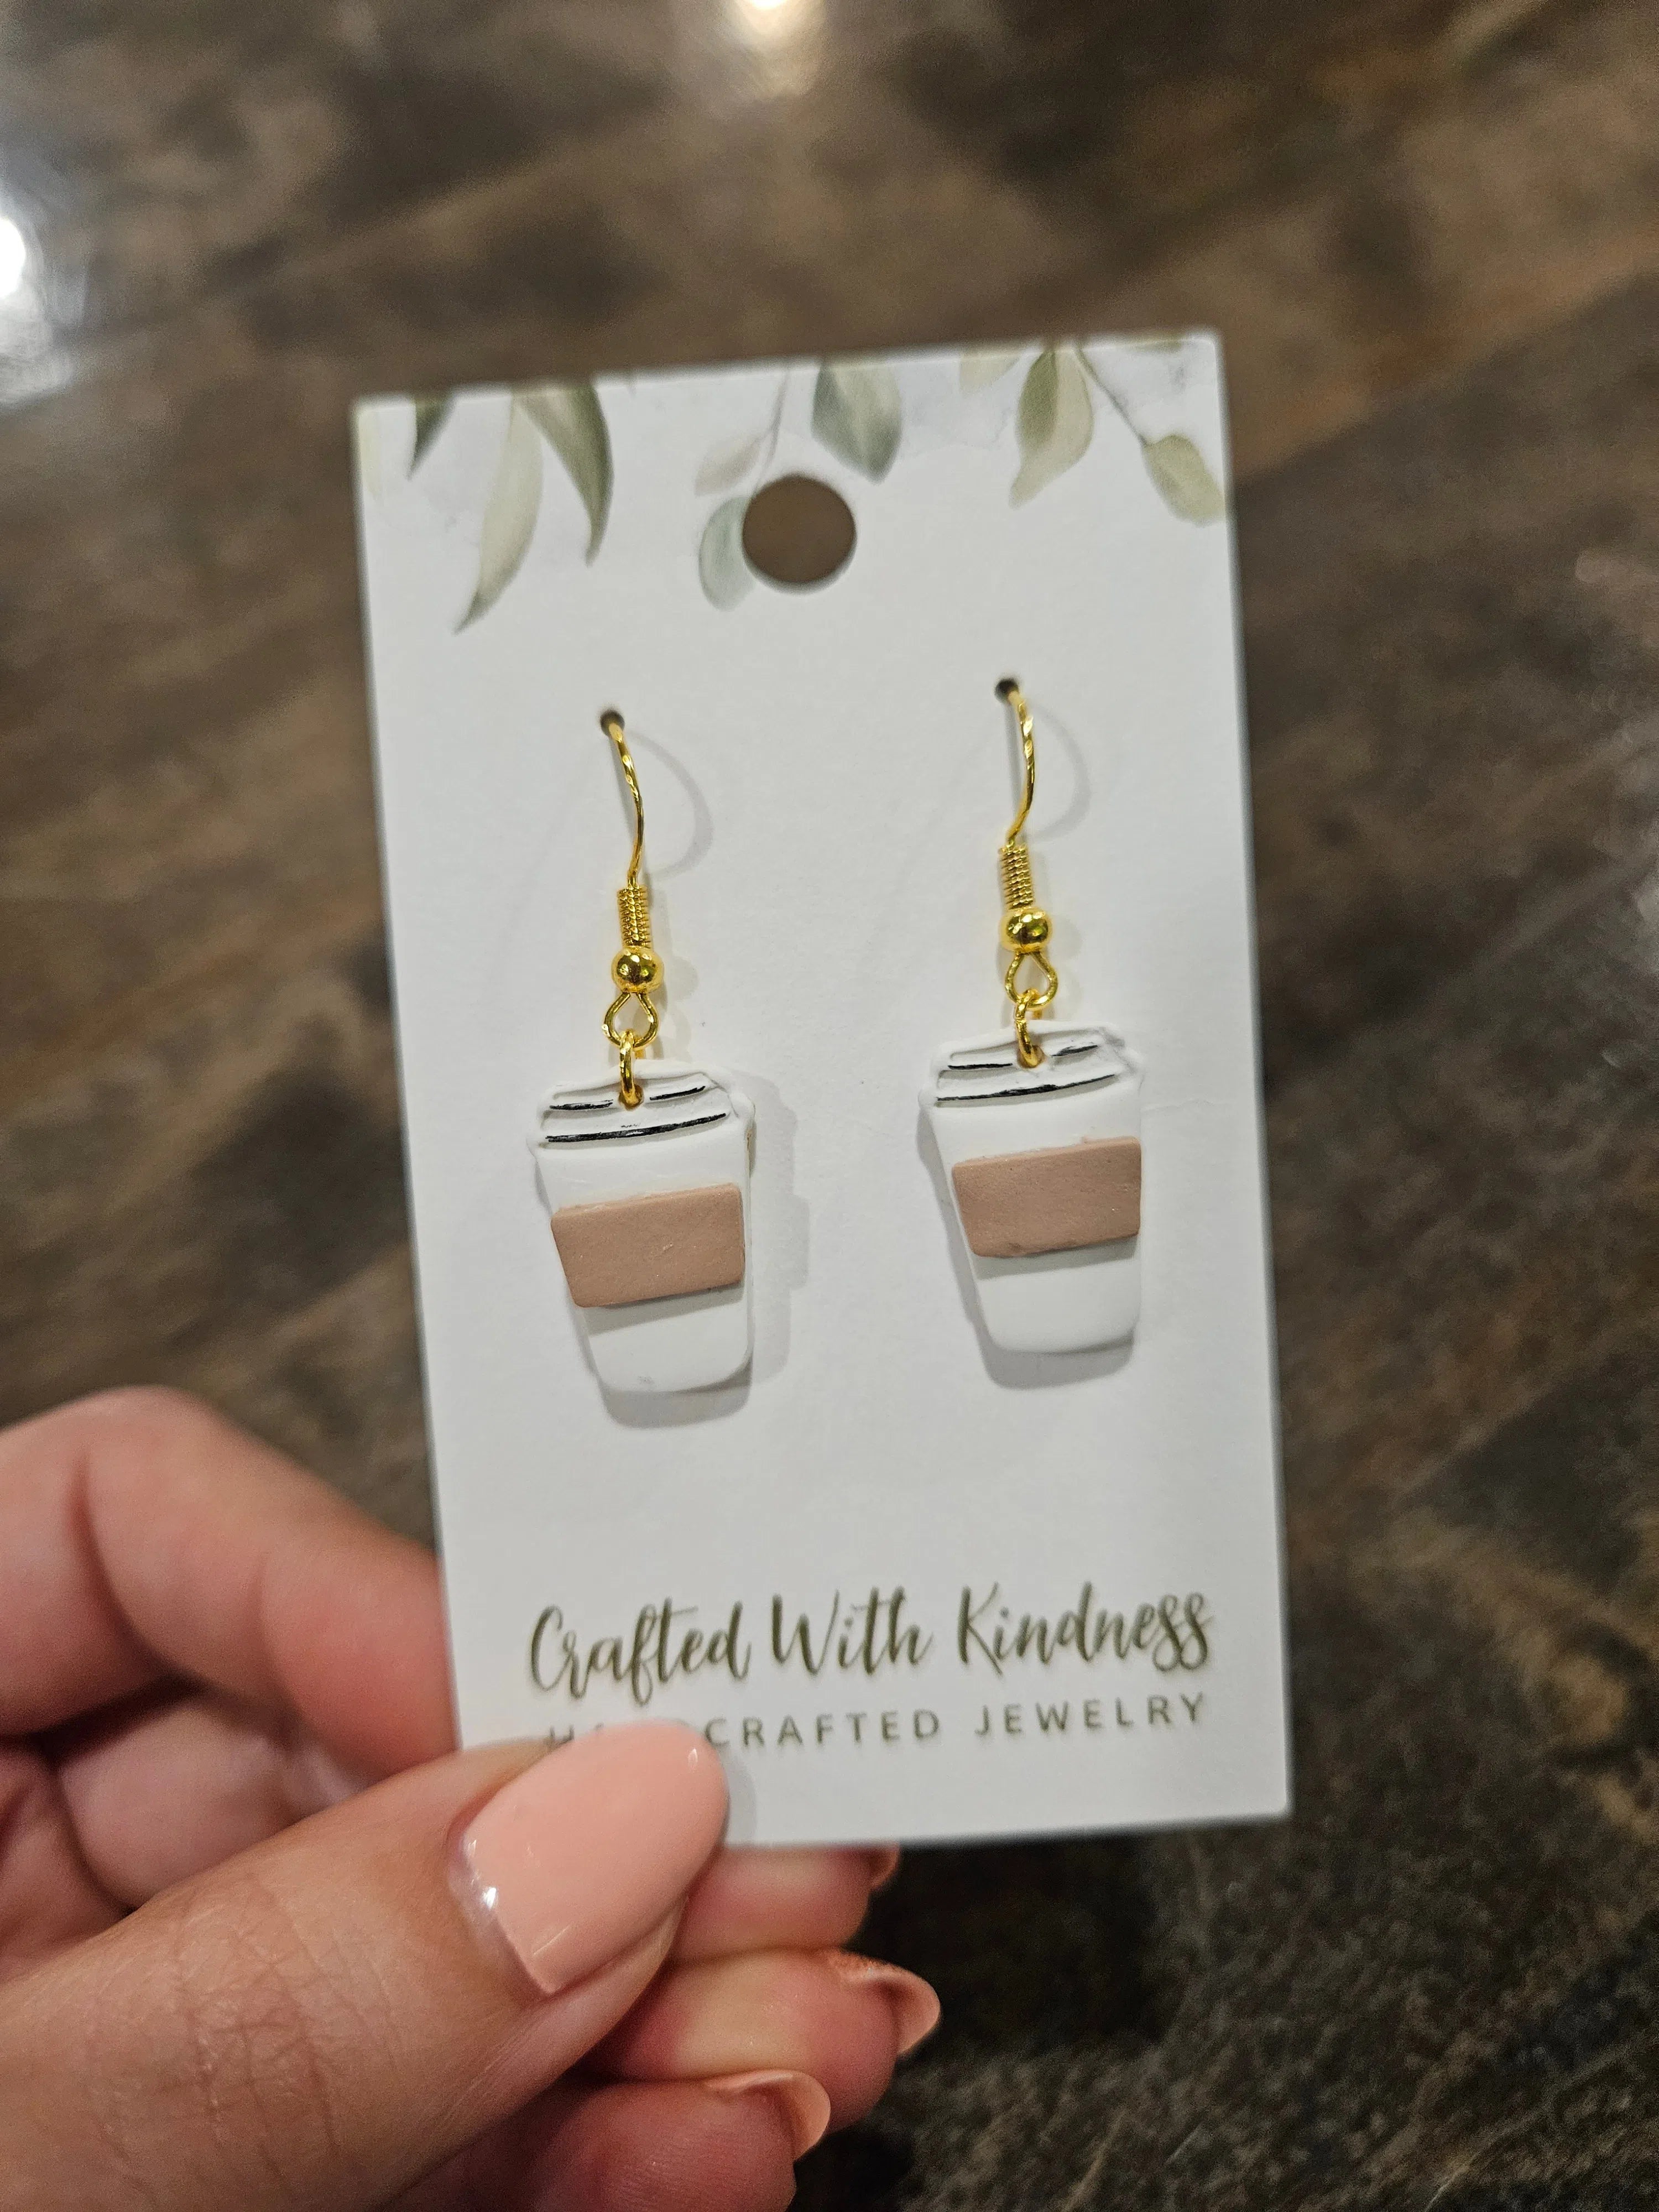 Shop Coffee Cup Clay Earrings-Earrings at Ruby Joy Boutique, a Women's Clothing Store in Pickerington, Ohio